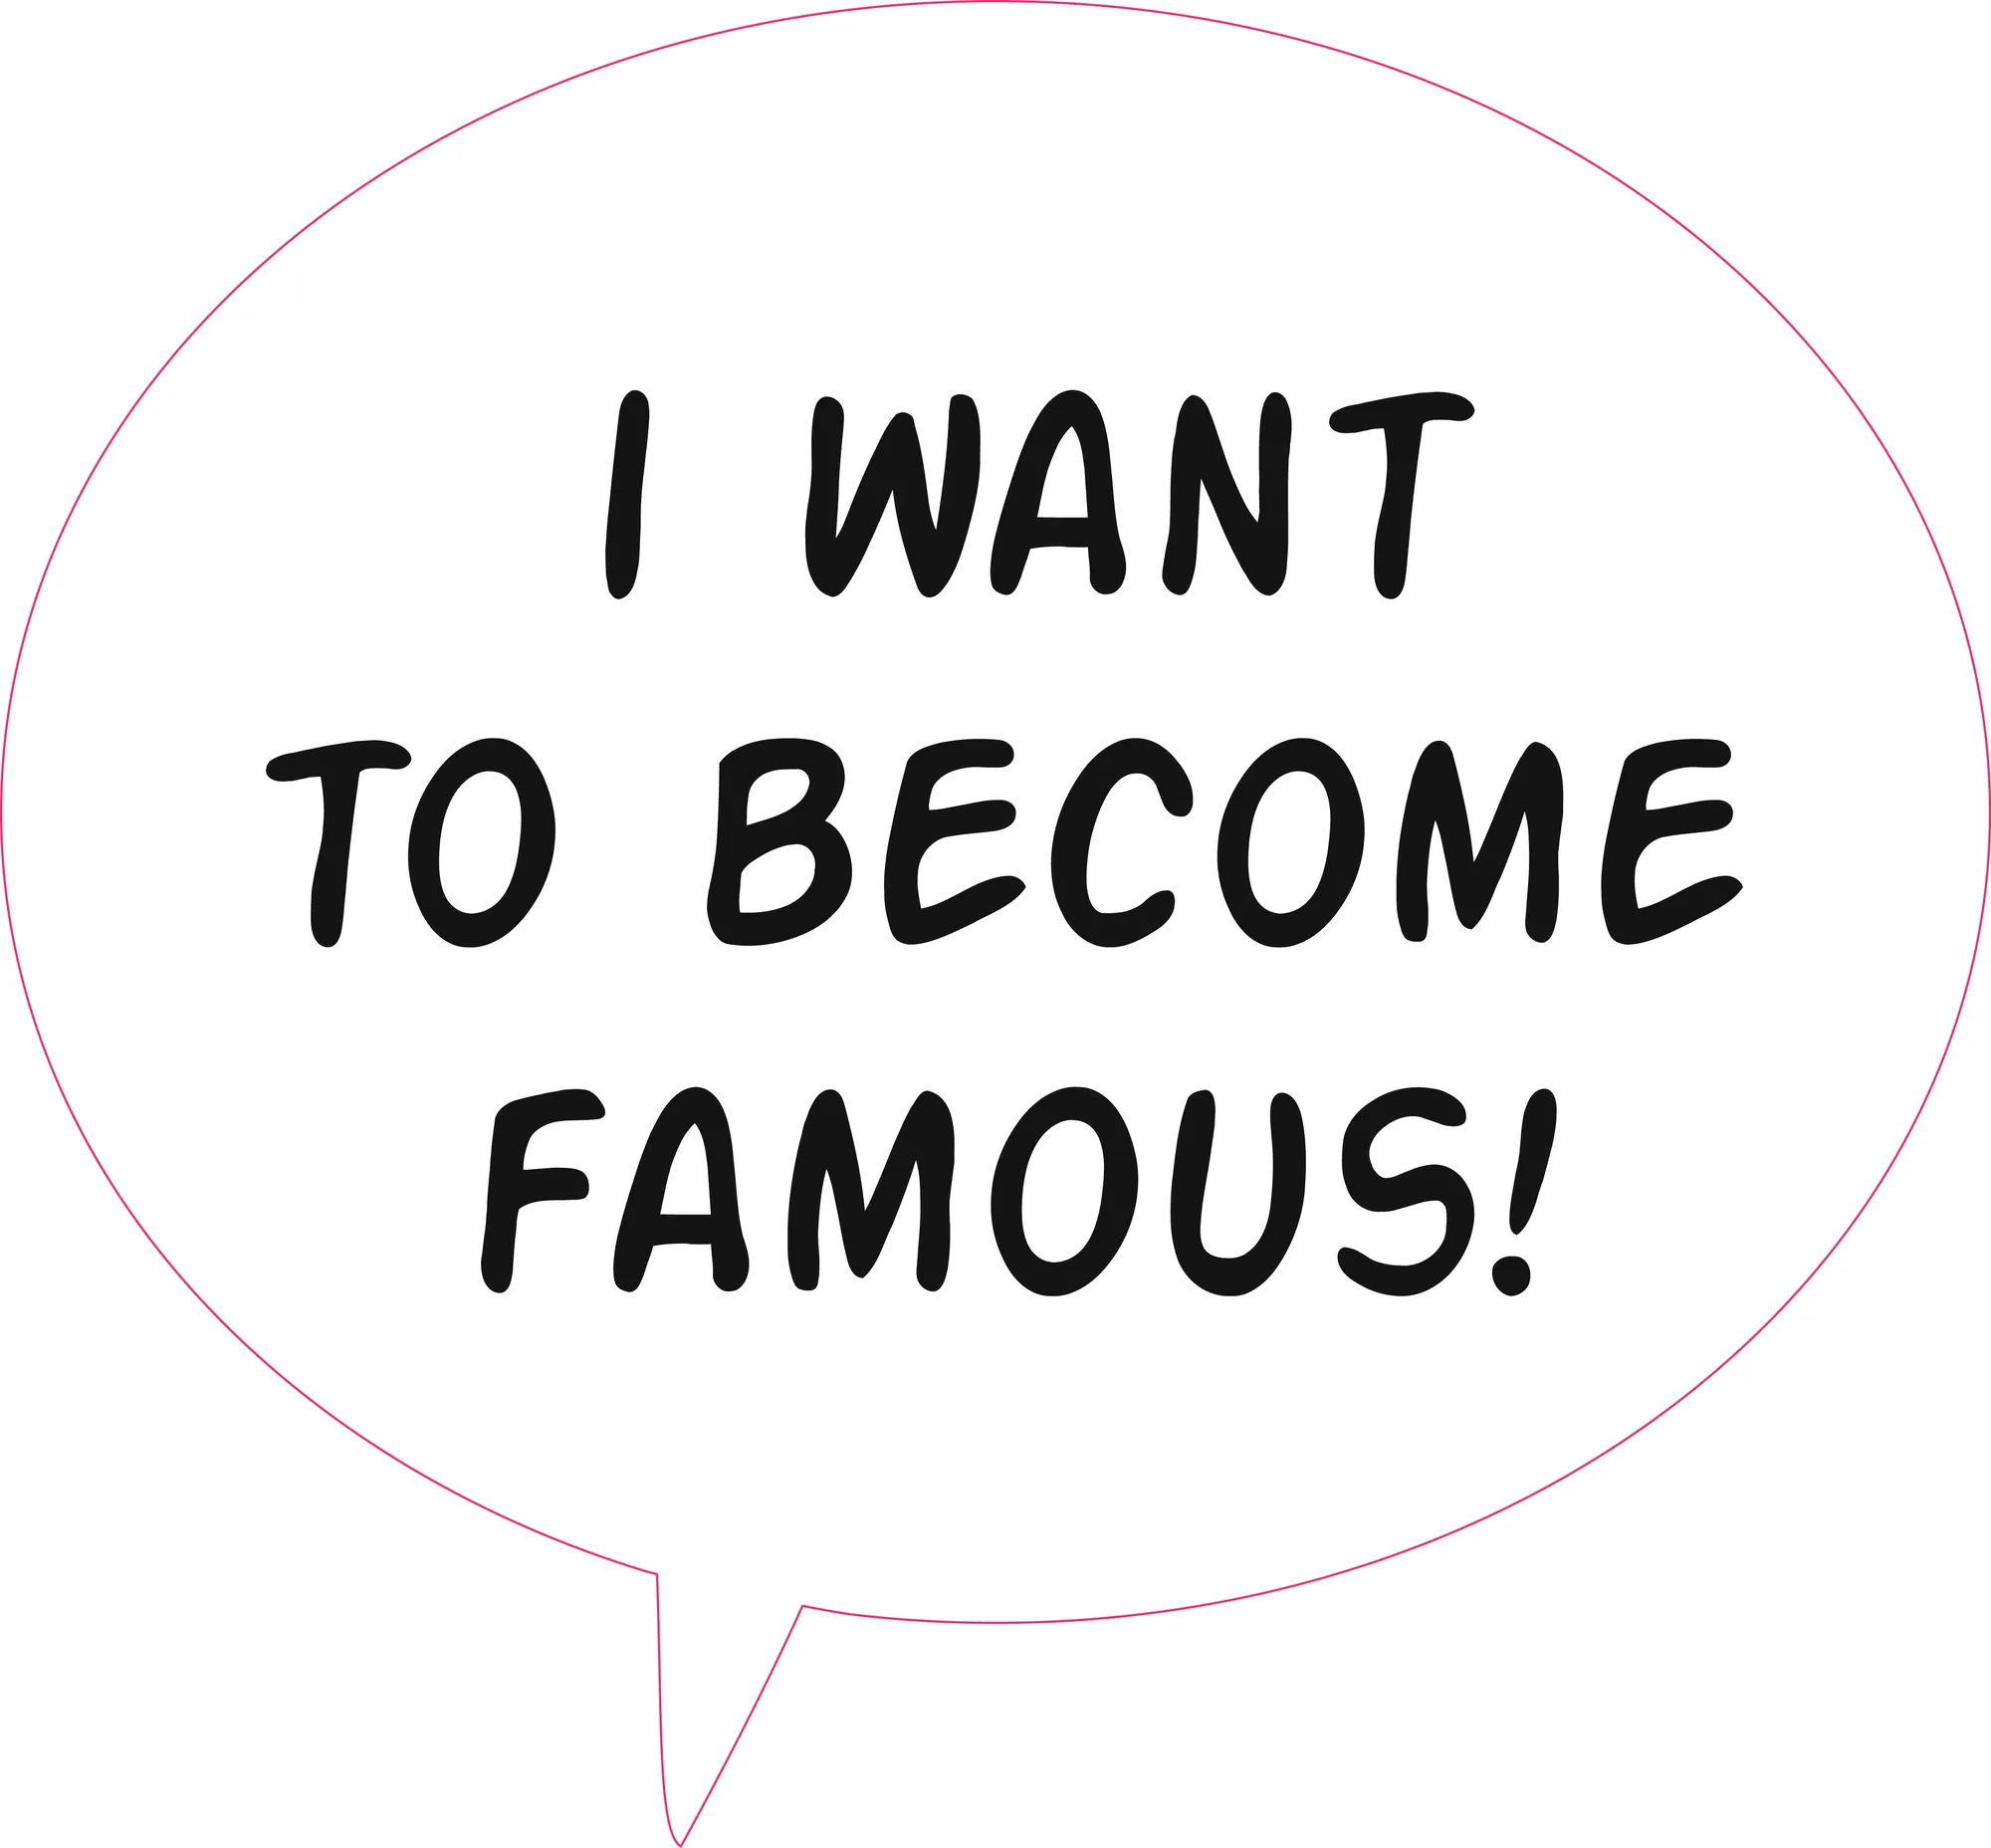 I want to become famous!